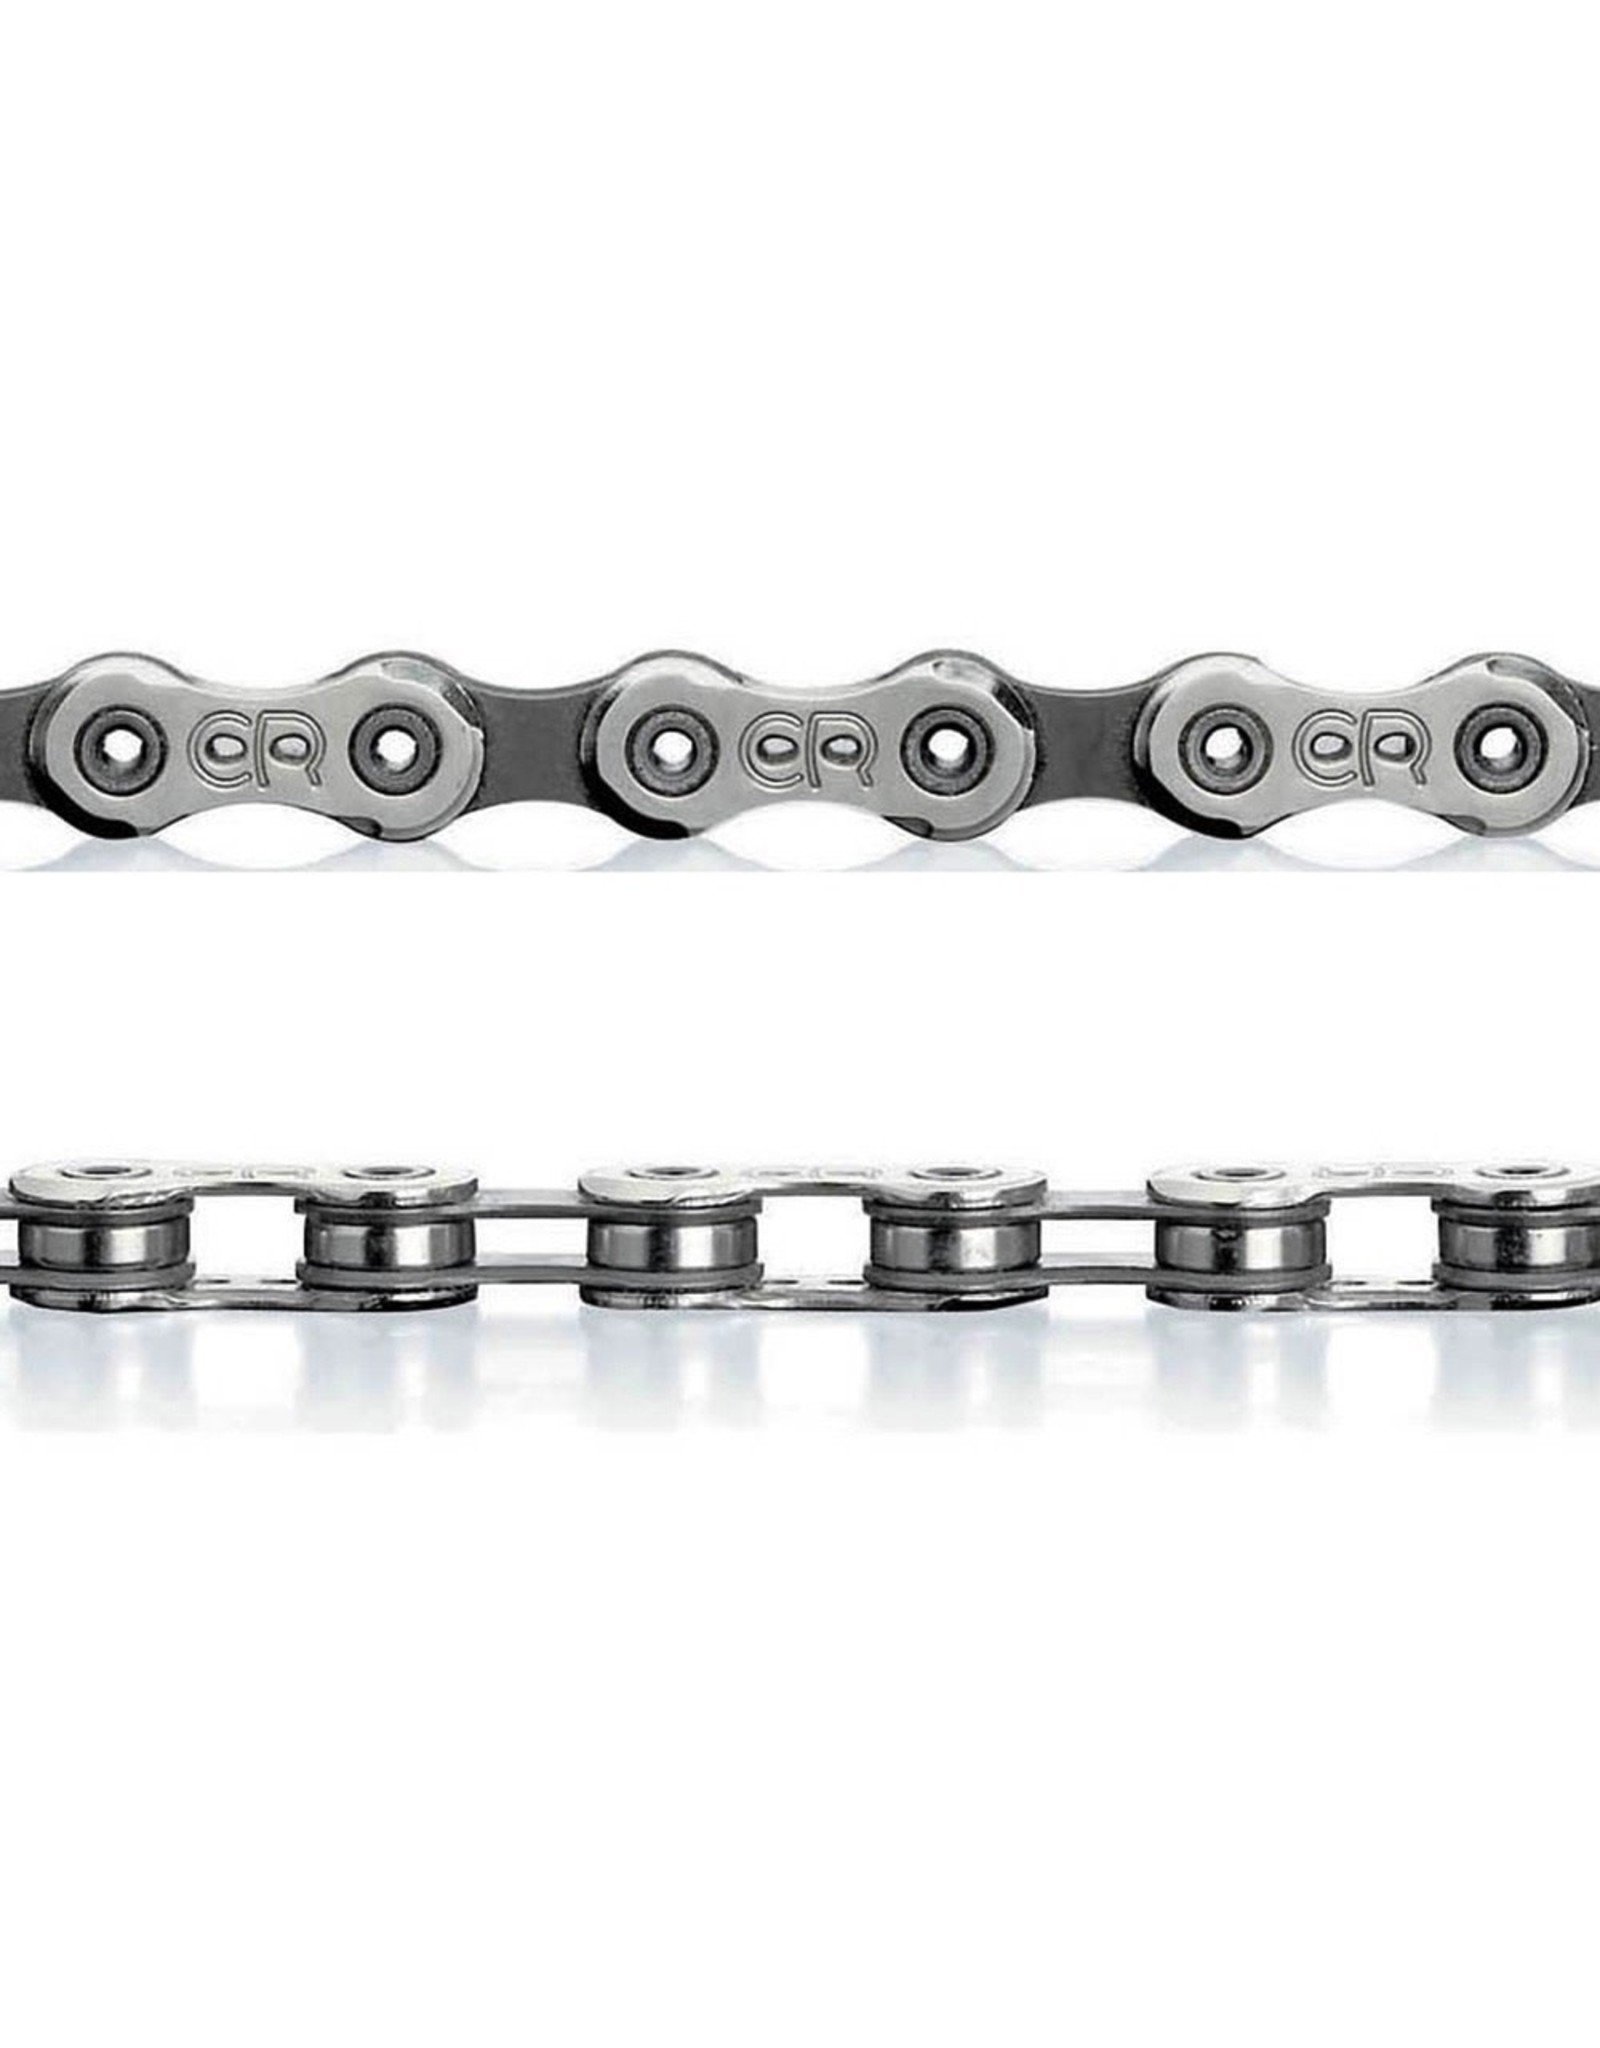 Campagnolo Chain 10 Speed Record